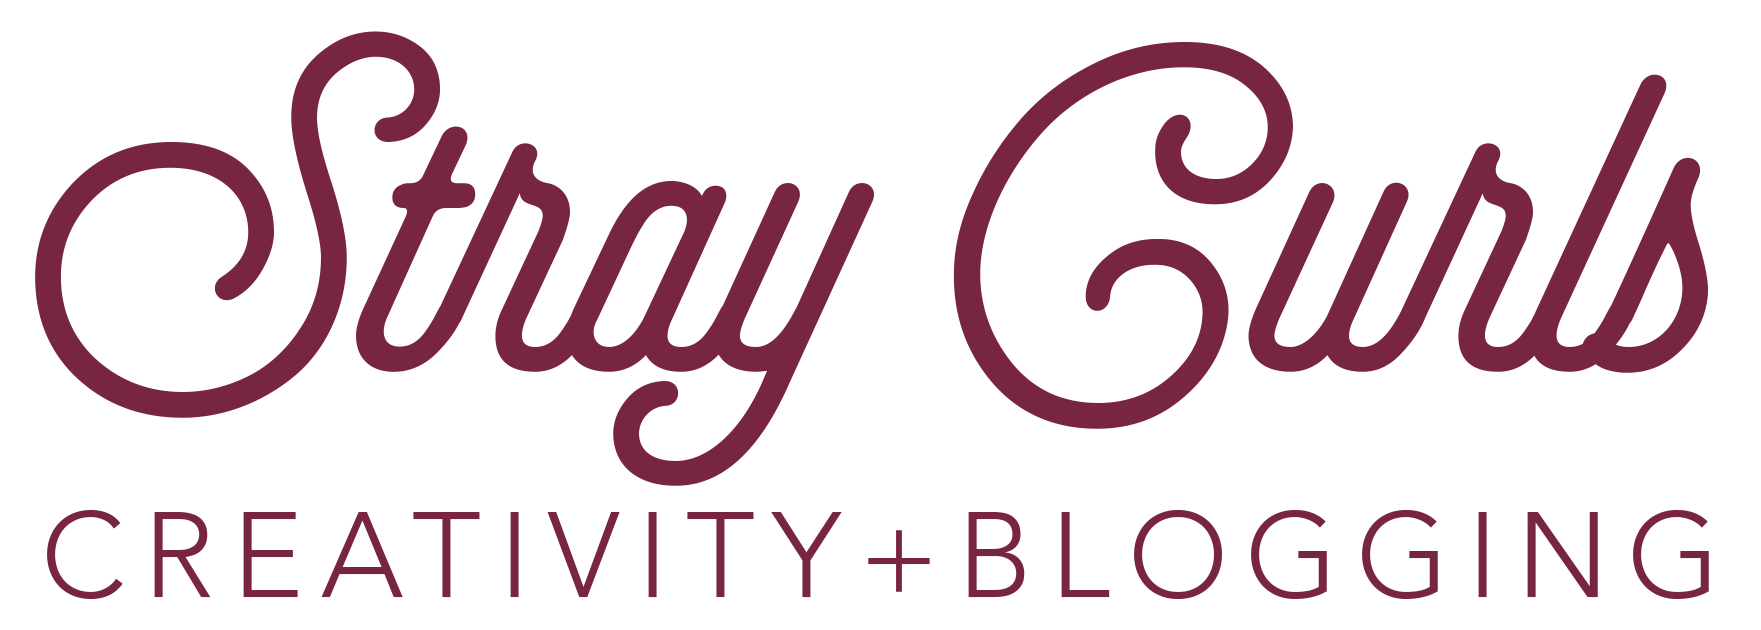 stray curls text only logo example